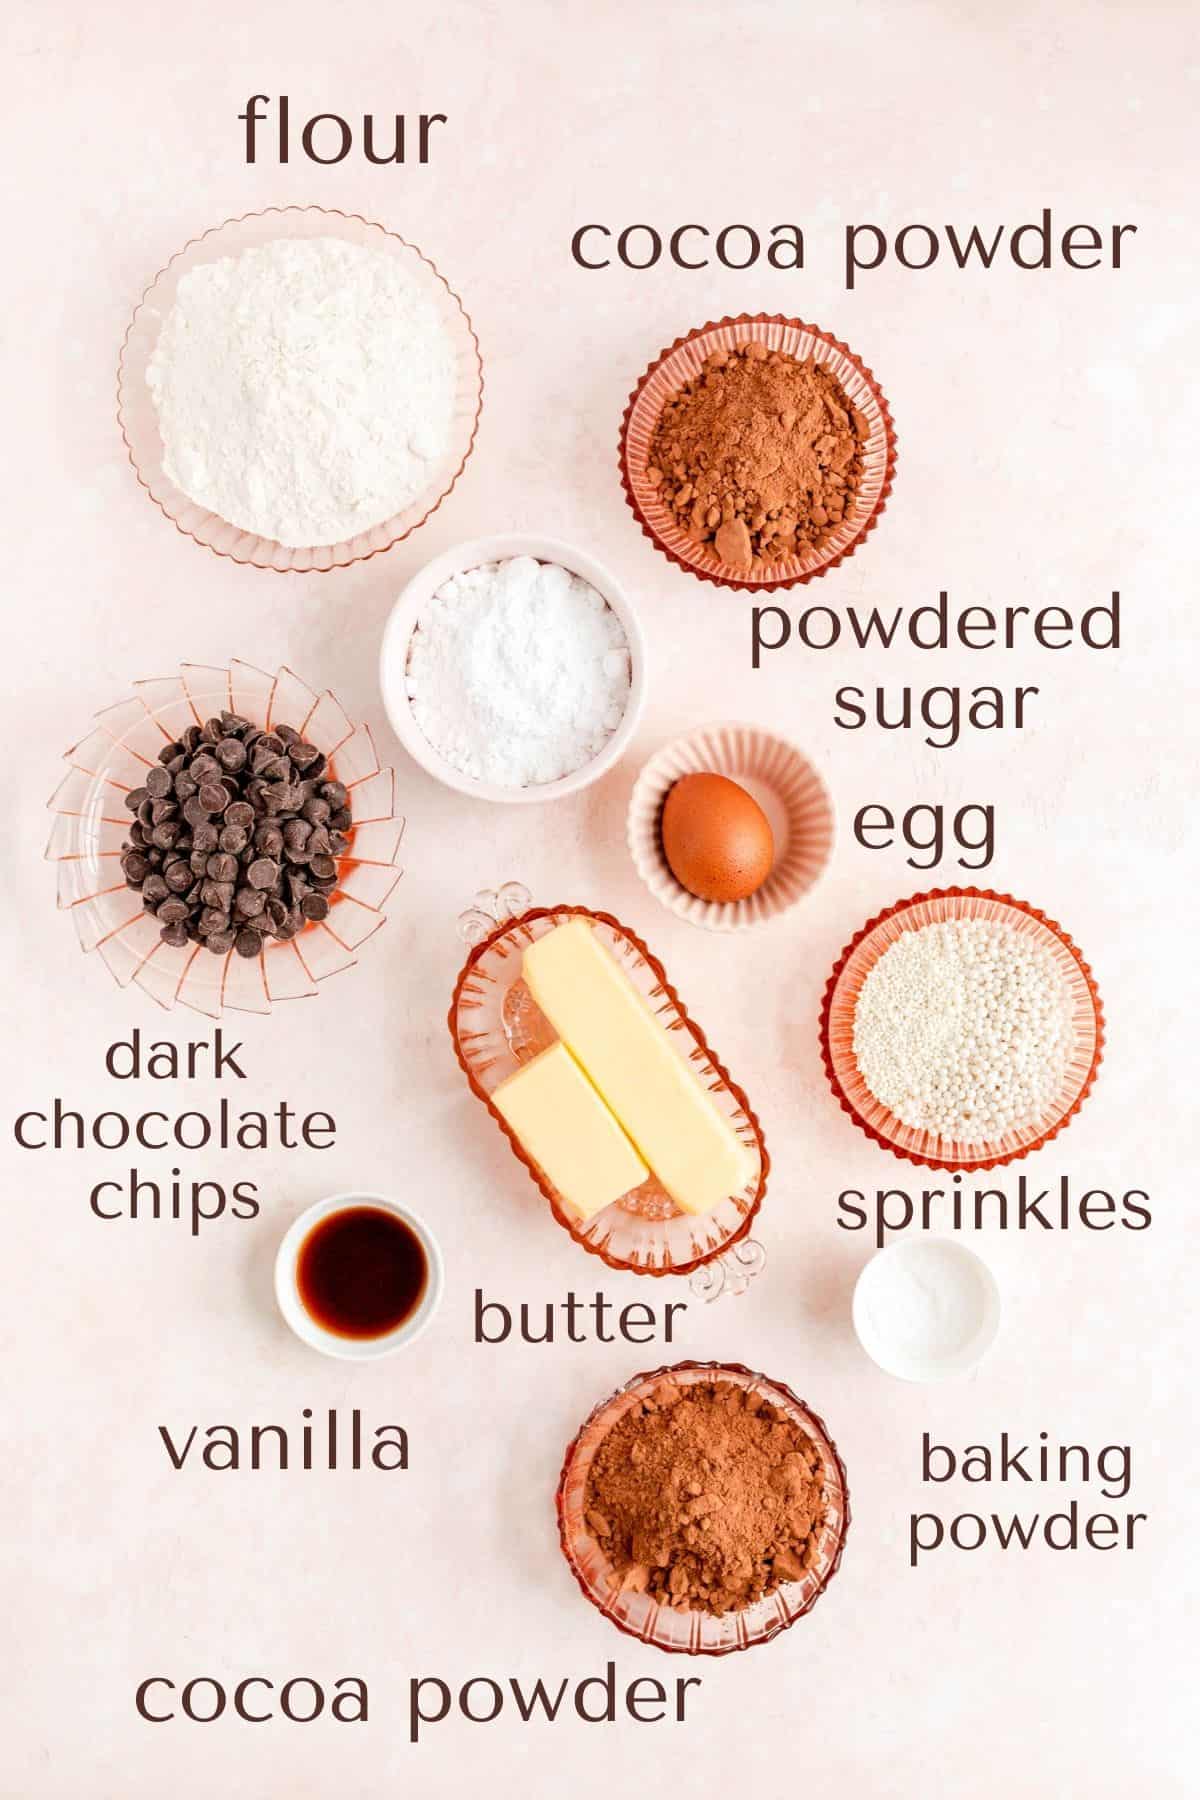 flour, cocoa, powdered sugar, egg, chocolate chips, butter, vanilla, baking powder, and sprinkles in bowls.